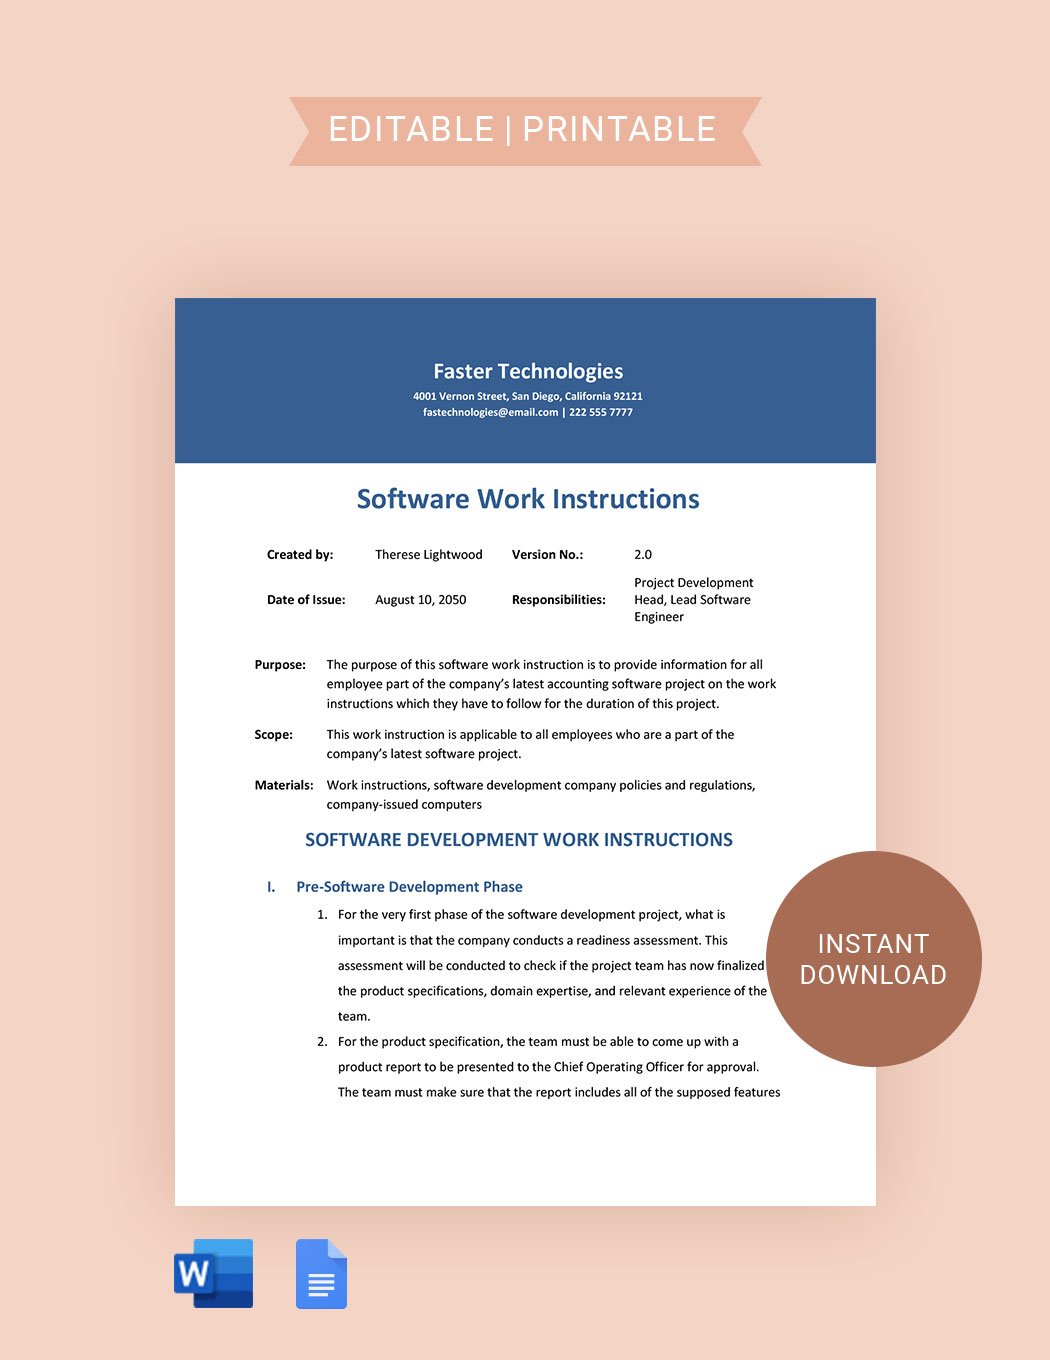 Software Work Instruction Template in Word, Google Docs